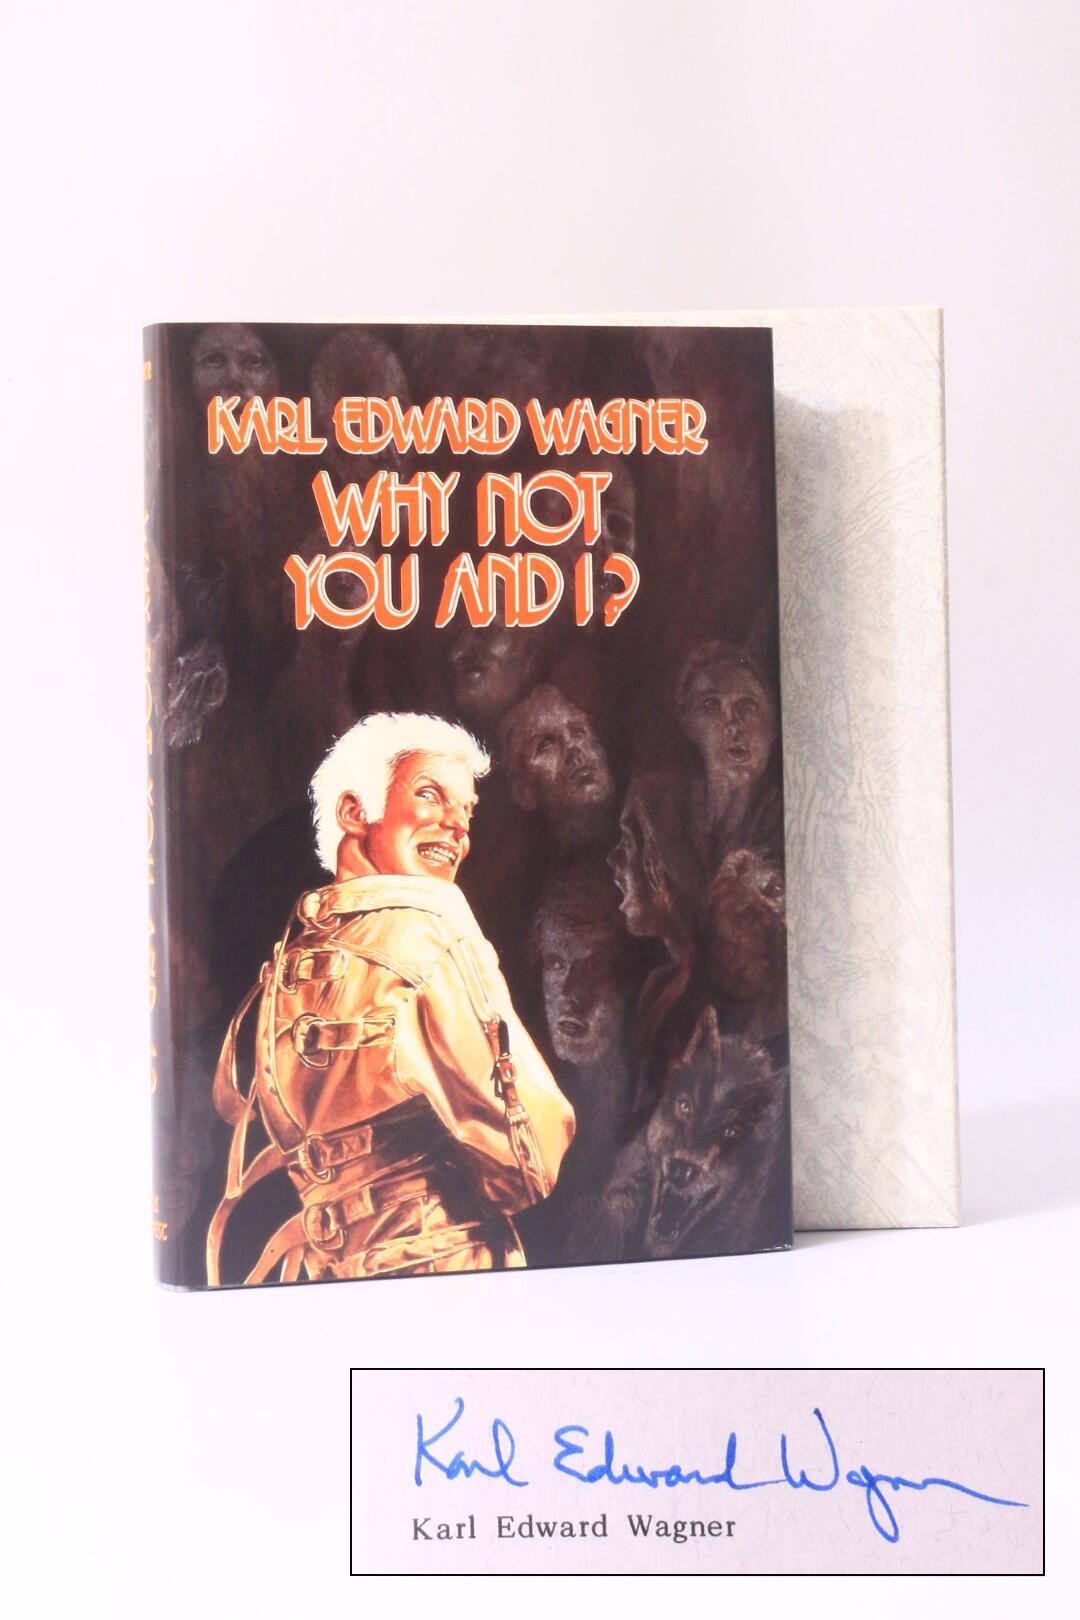 Karl Edward Wagner - Why Not You And I? - Dark Harvest, 1987, Signed Limited Edition.